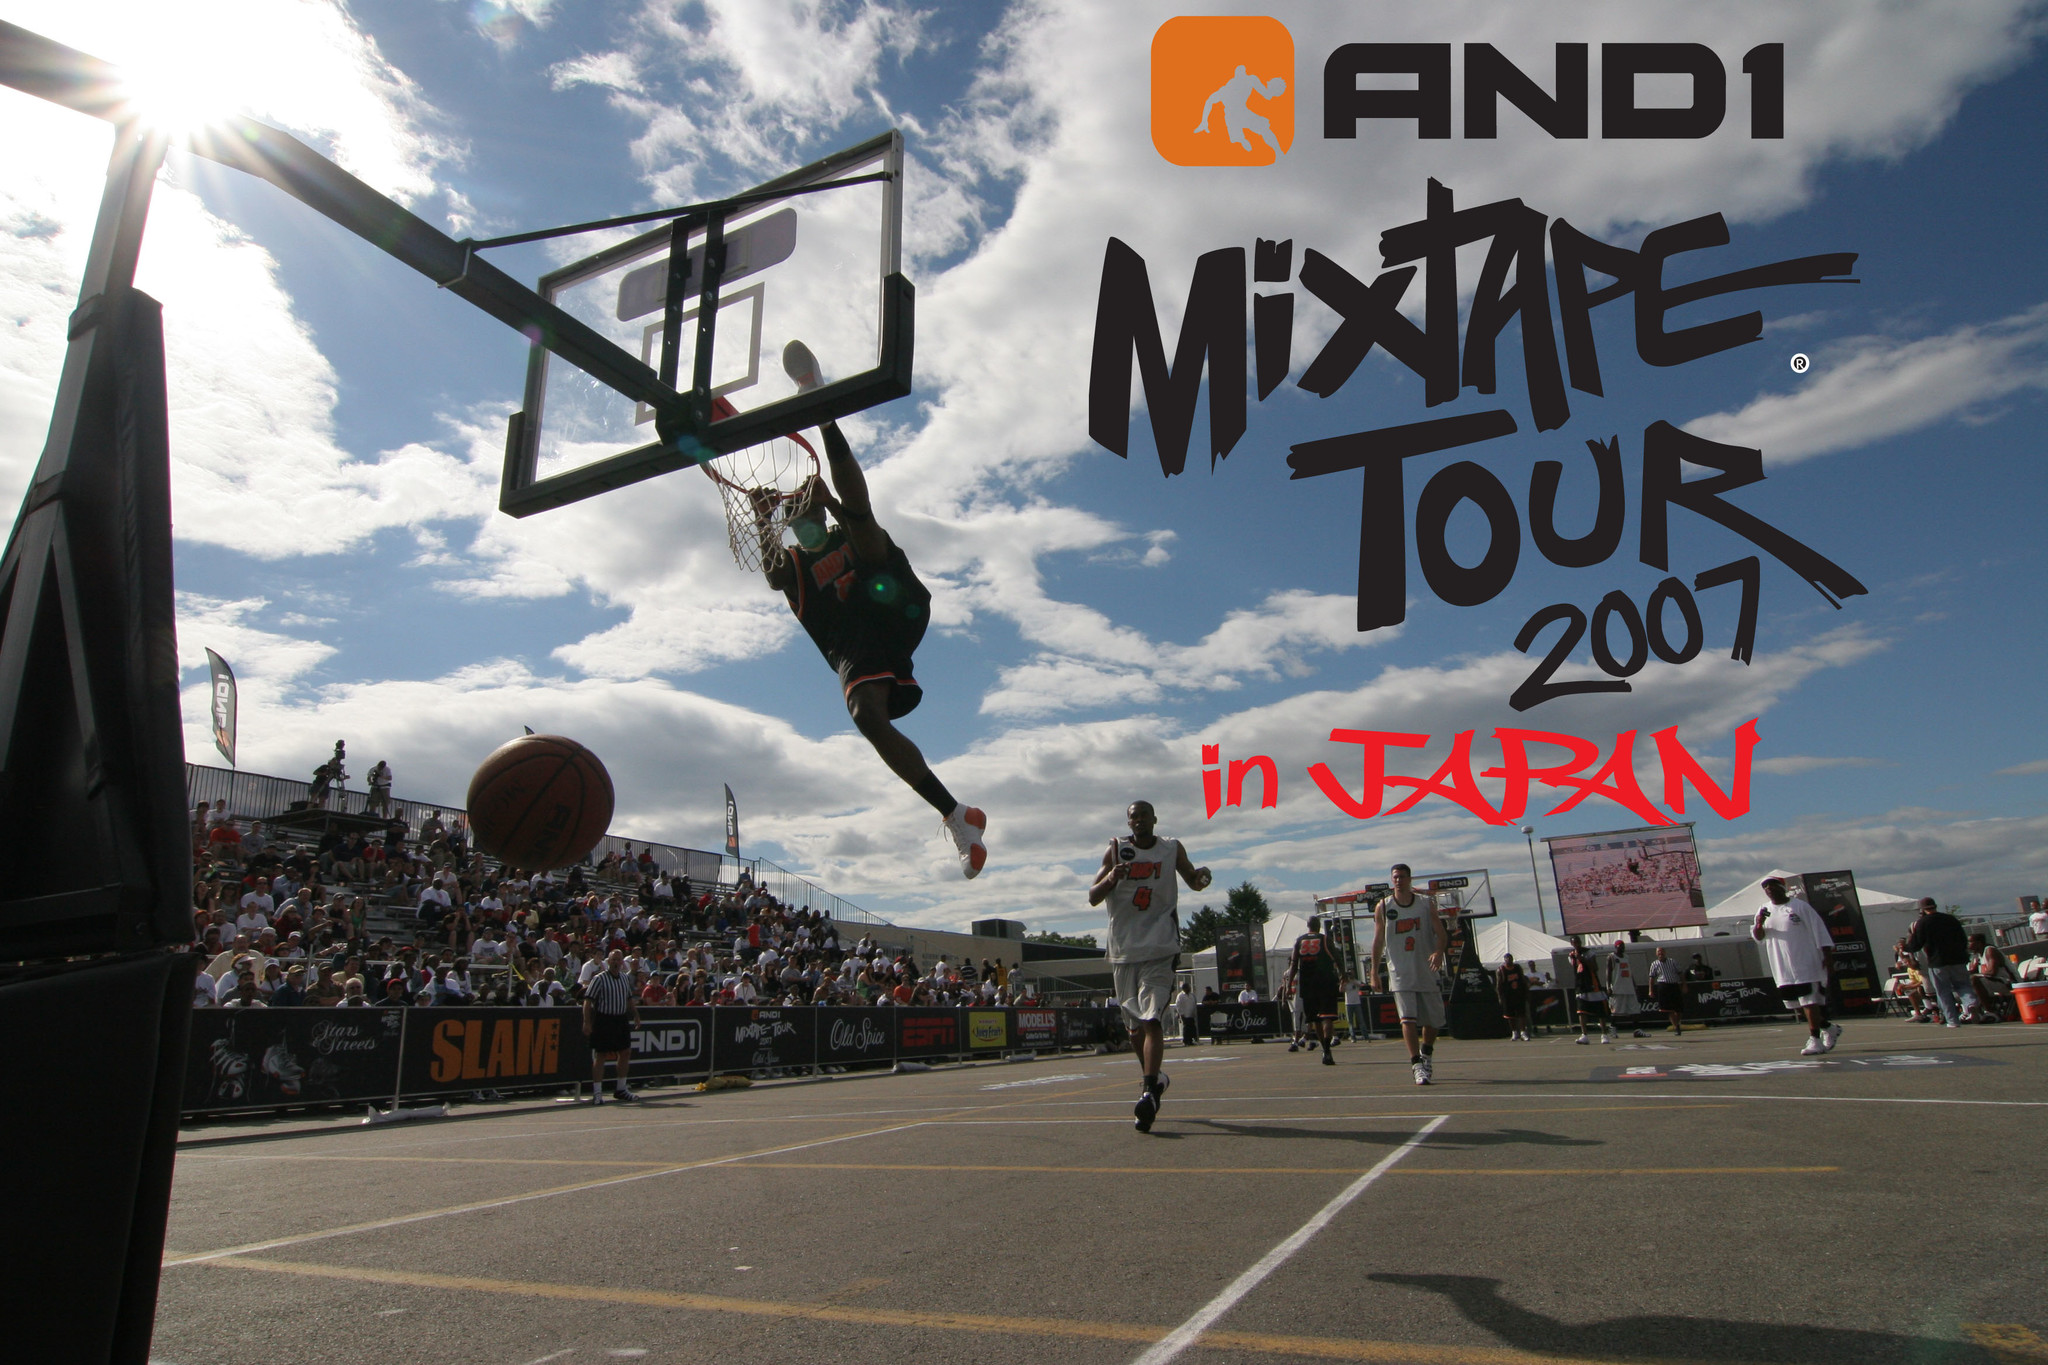 「AND1 MIX TAPE TOUR 2007 in JAPAN」開催！｜株式会社スポーツビズのプレスリリース